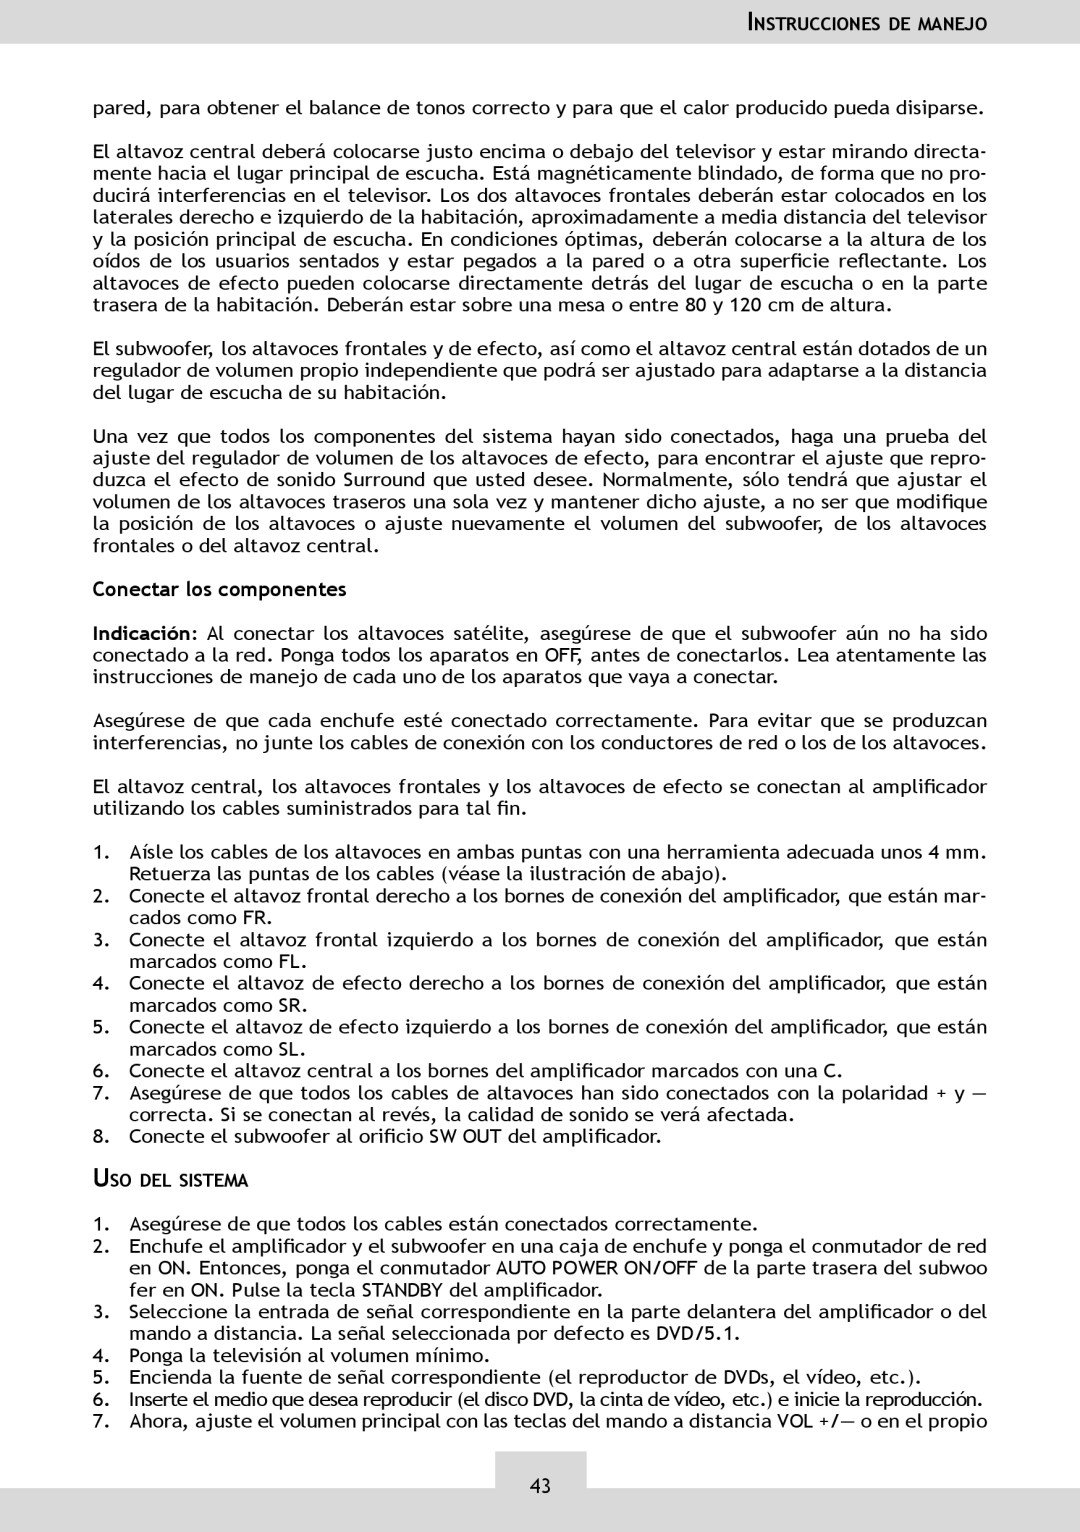 Dolby Laboratories KH 02 manual Conectar los componentes 